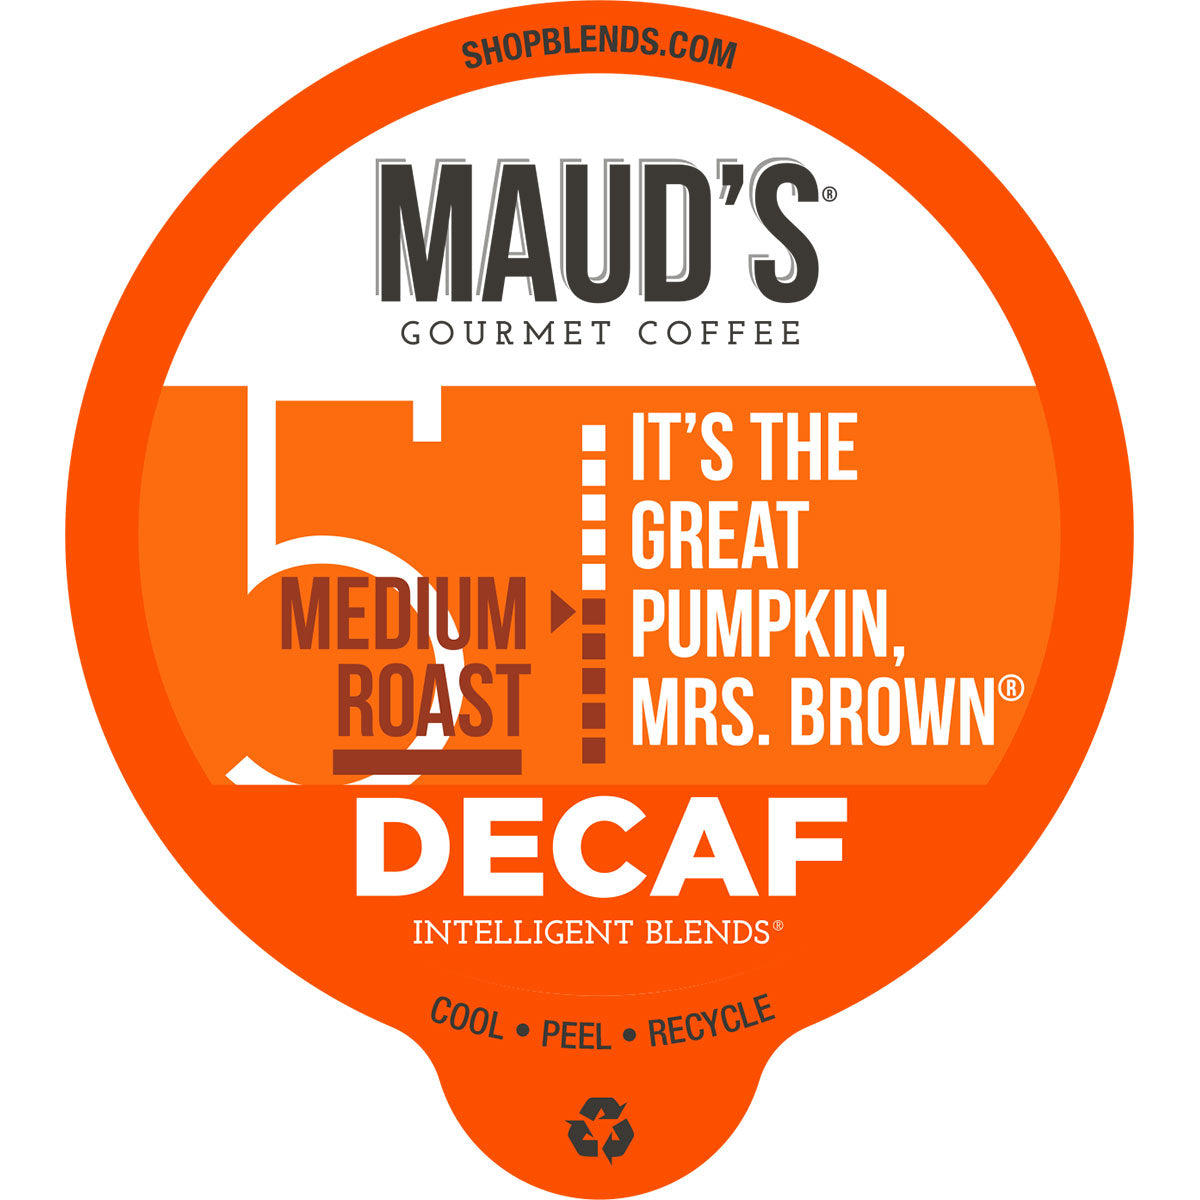 Maud's Decaf Pumpkin Spice Flavored Coffee Pods  (It's The Great Pumpkin, Mrs. Brown) - 18ct